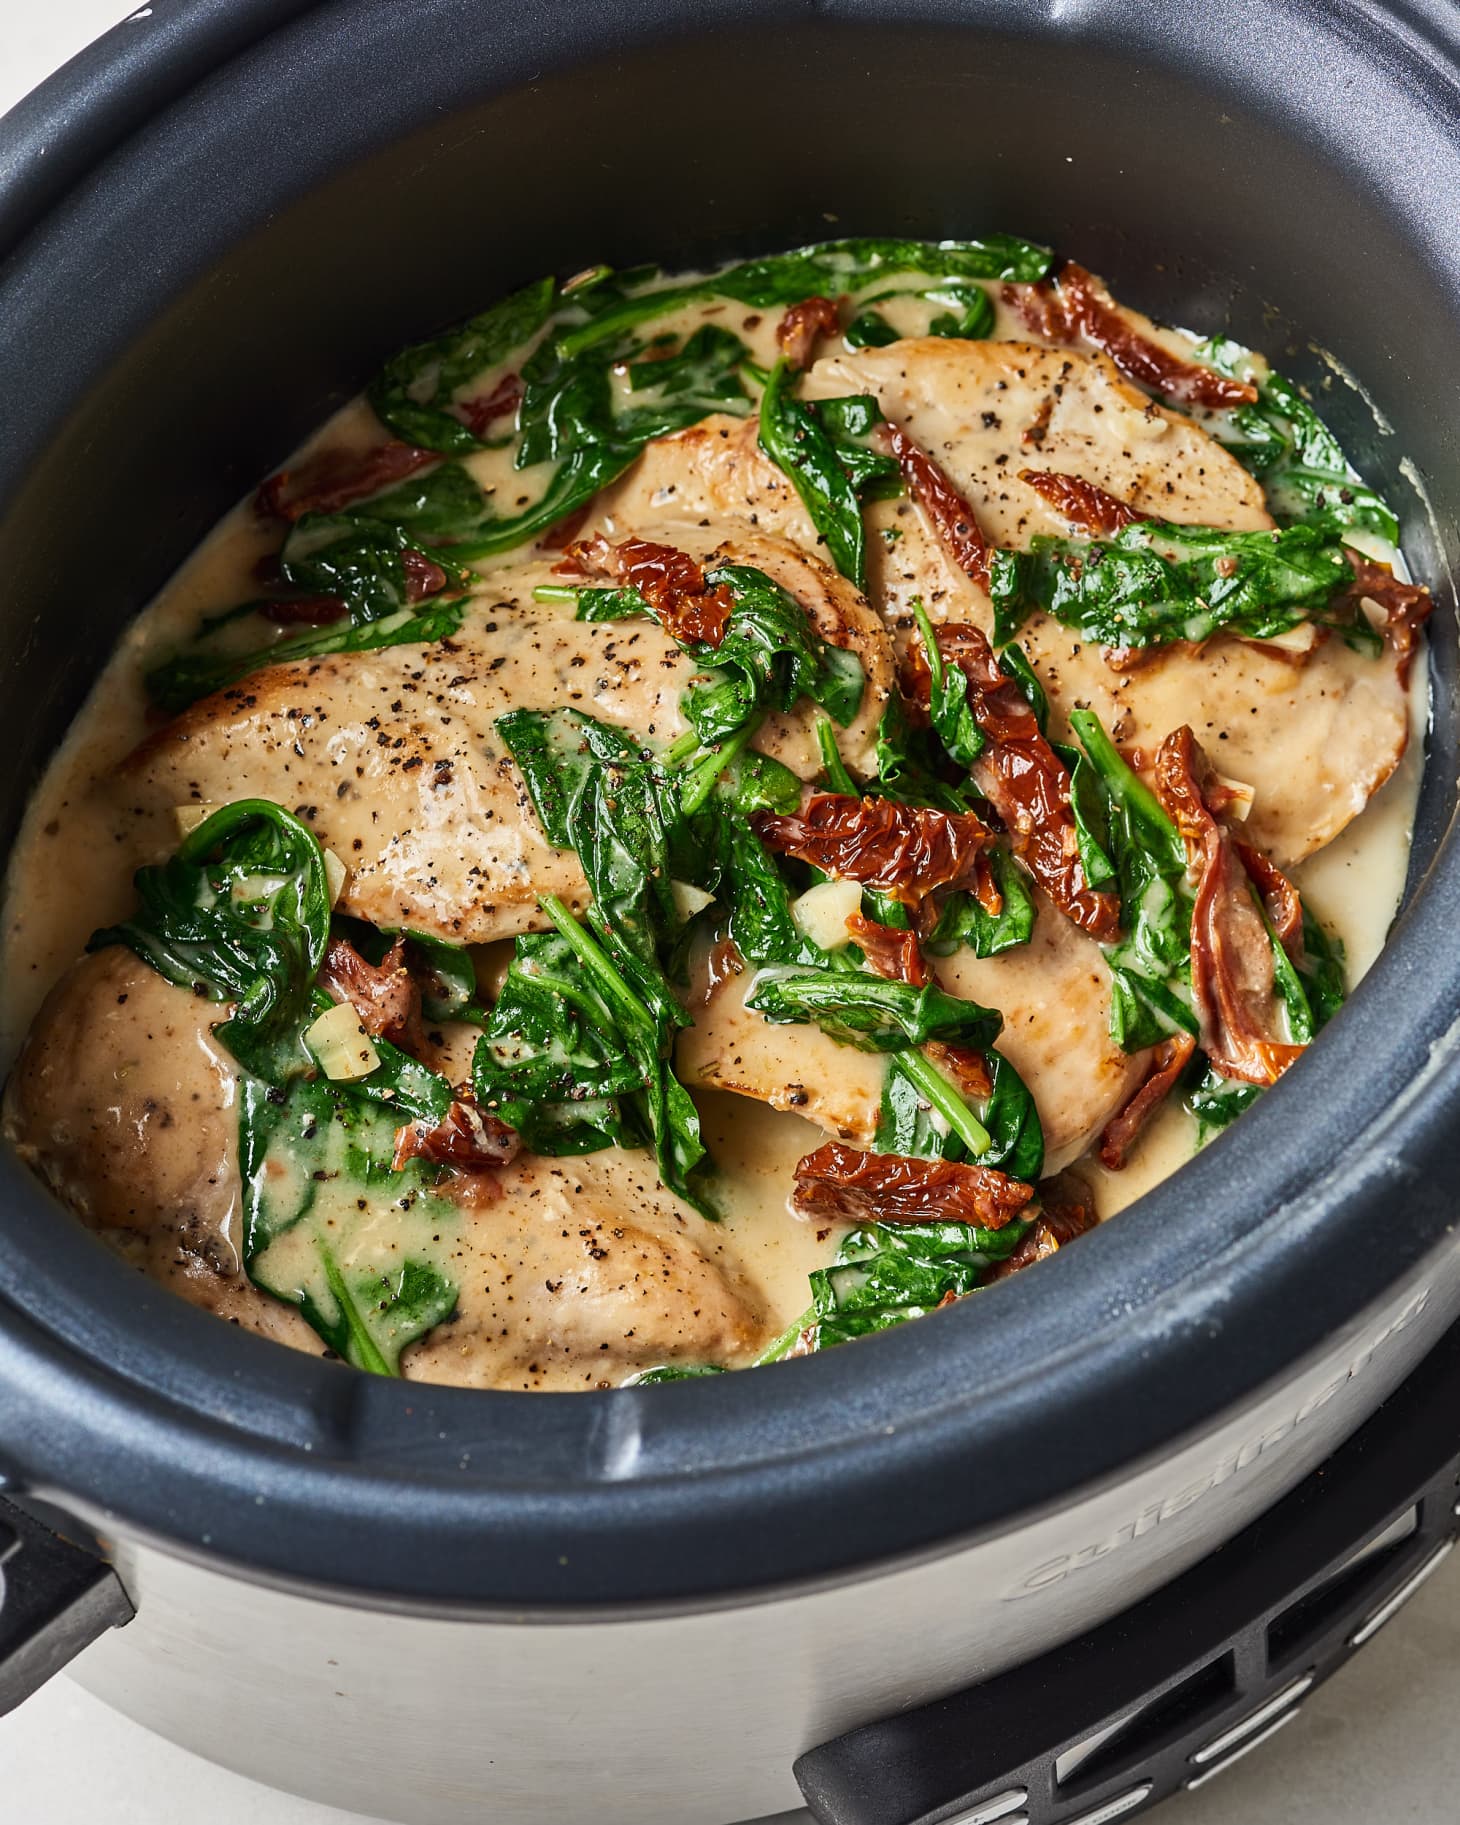 Slow Cooker Creamy Tuscan Garlic Chicken from The Kitchn